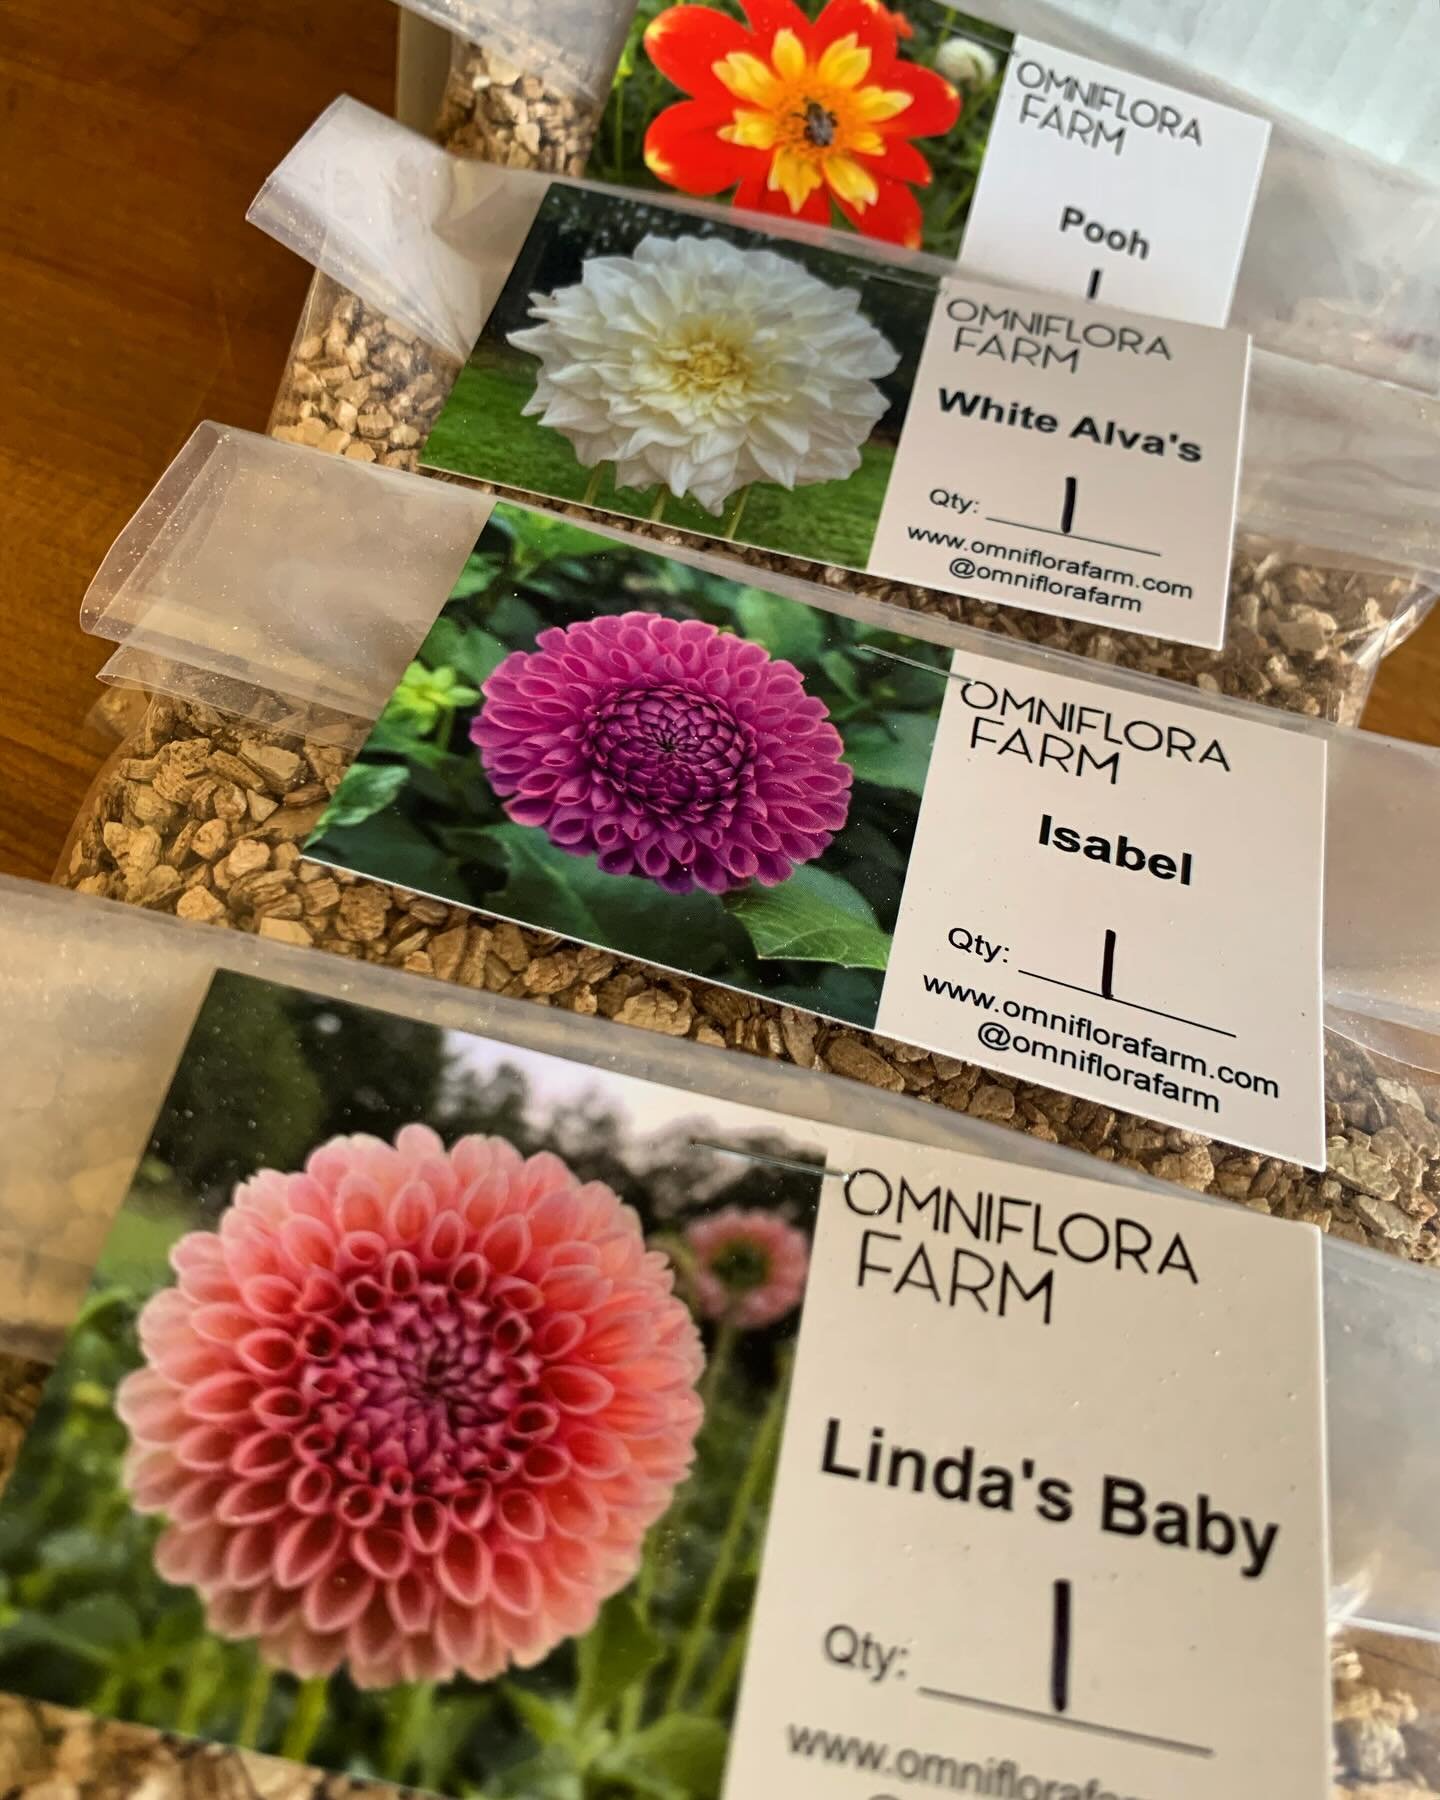 A box of therapy, exercise, and inspiration just showed up on my doorstep. 🙏🏻 @omniflorafarm #dahlia #floralinspiration